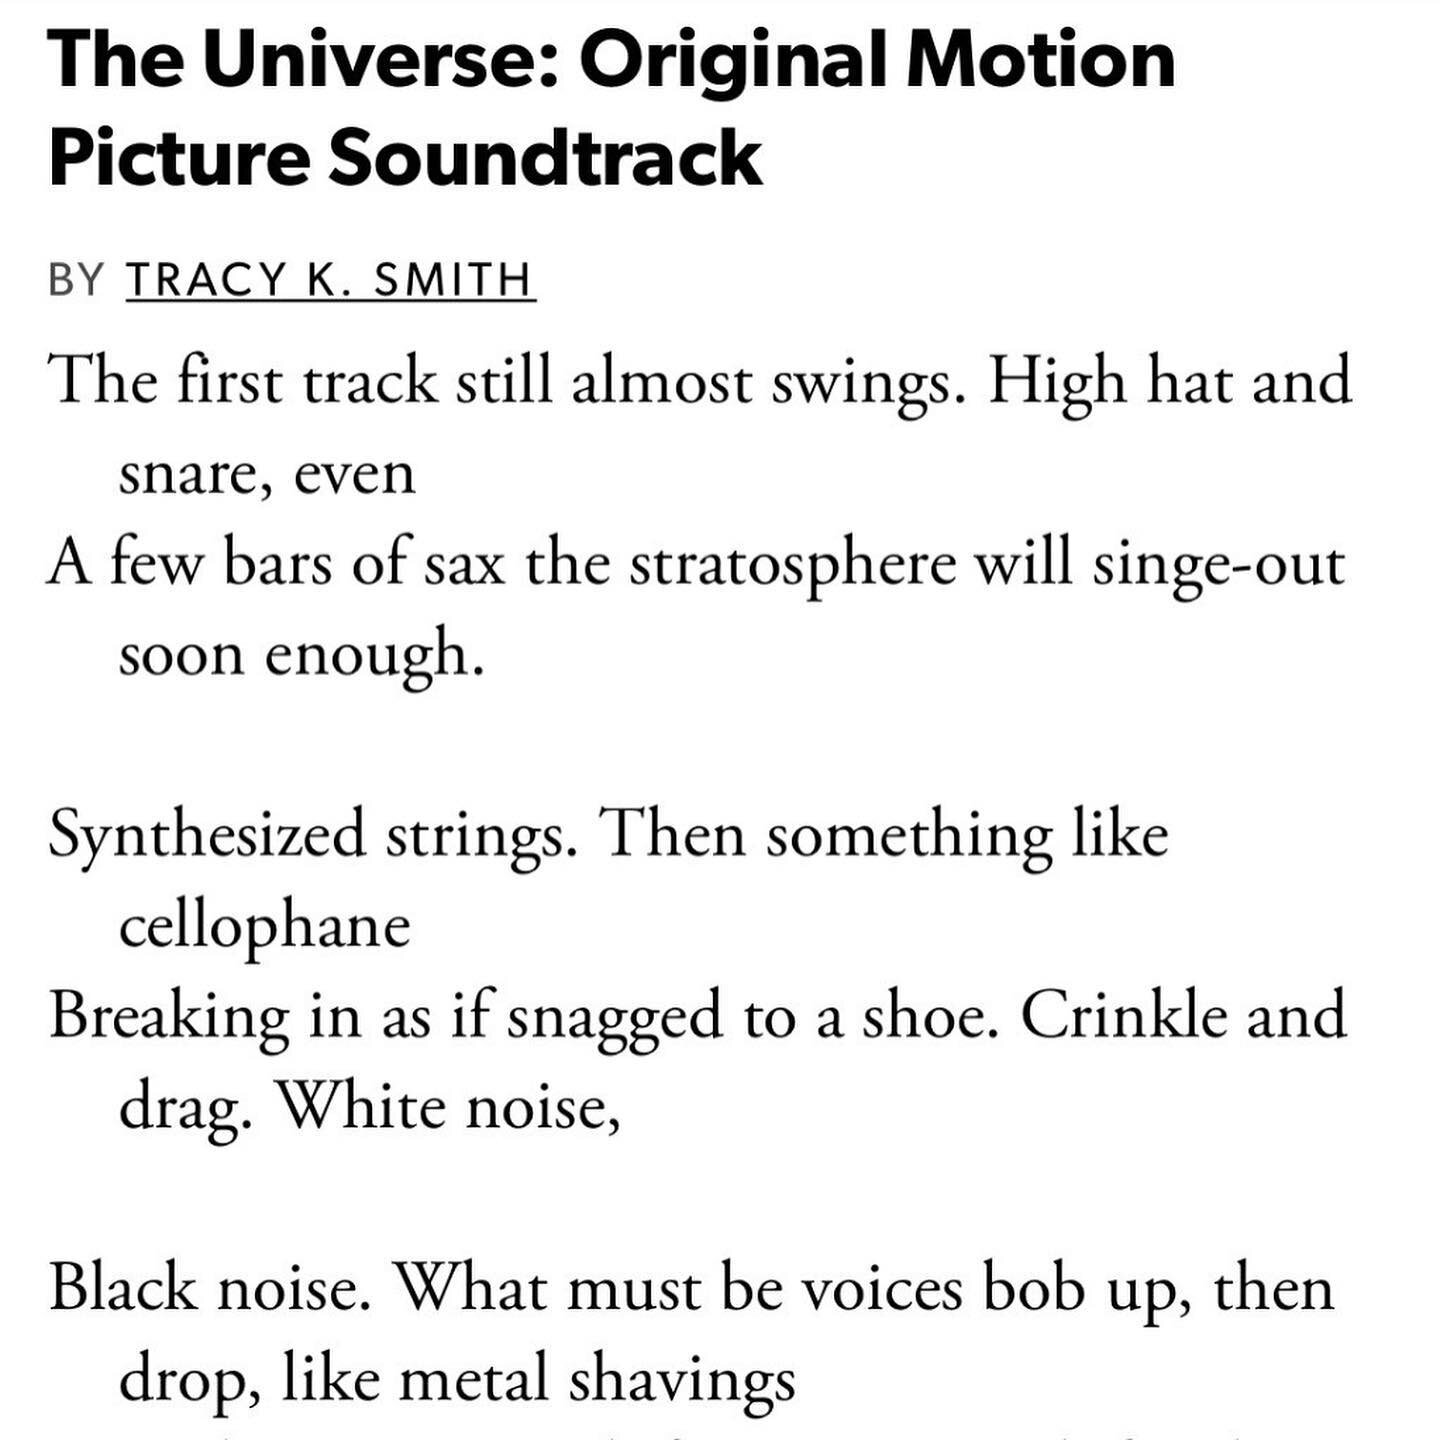 &ldquo;The Universe: Original Motion Picture Soundtrack&rdquo; by @tracyksmithpoet . Her book Life on Mars is one of my favorites. #nationalpoetrymonth #poetry #poems